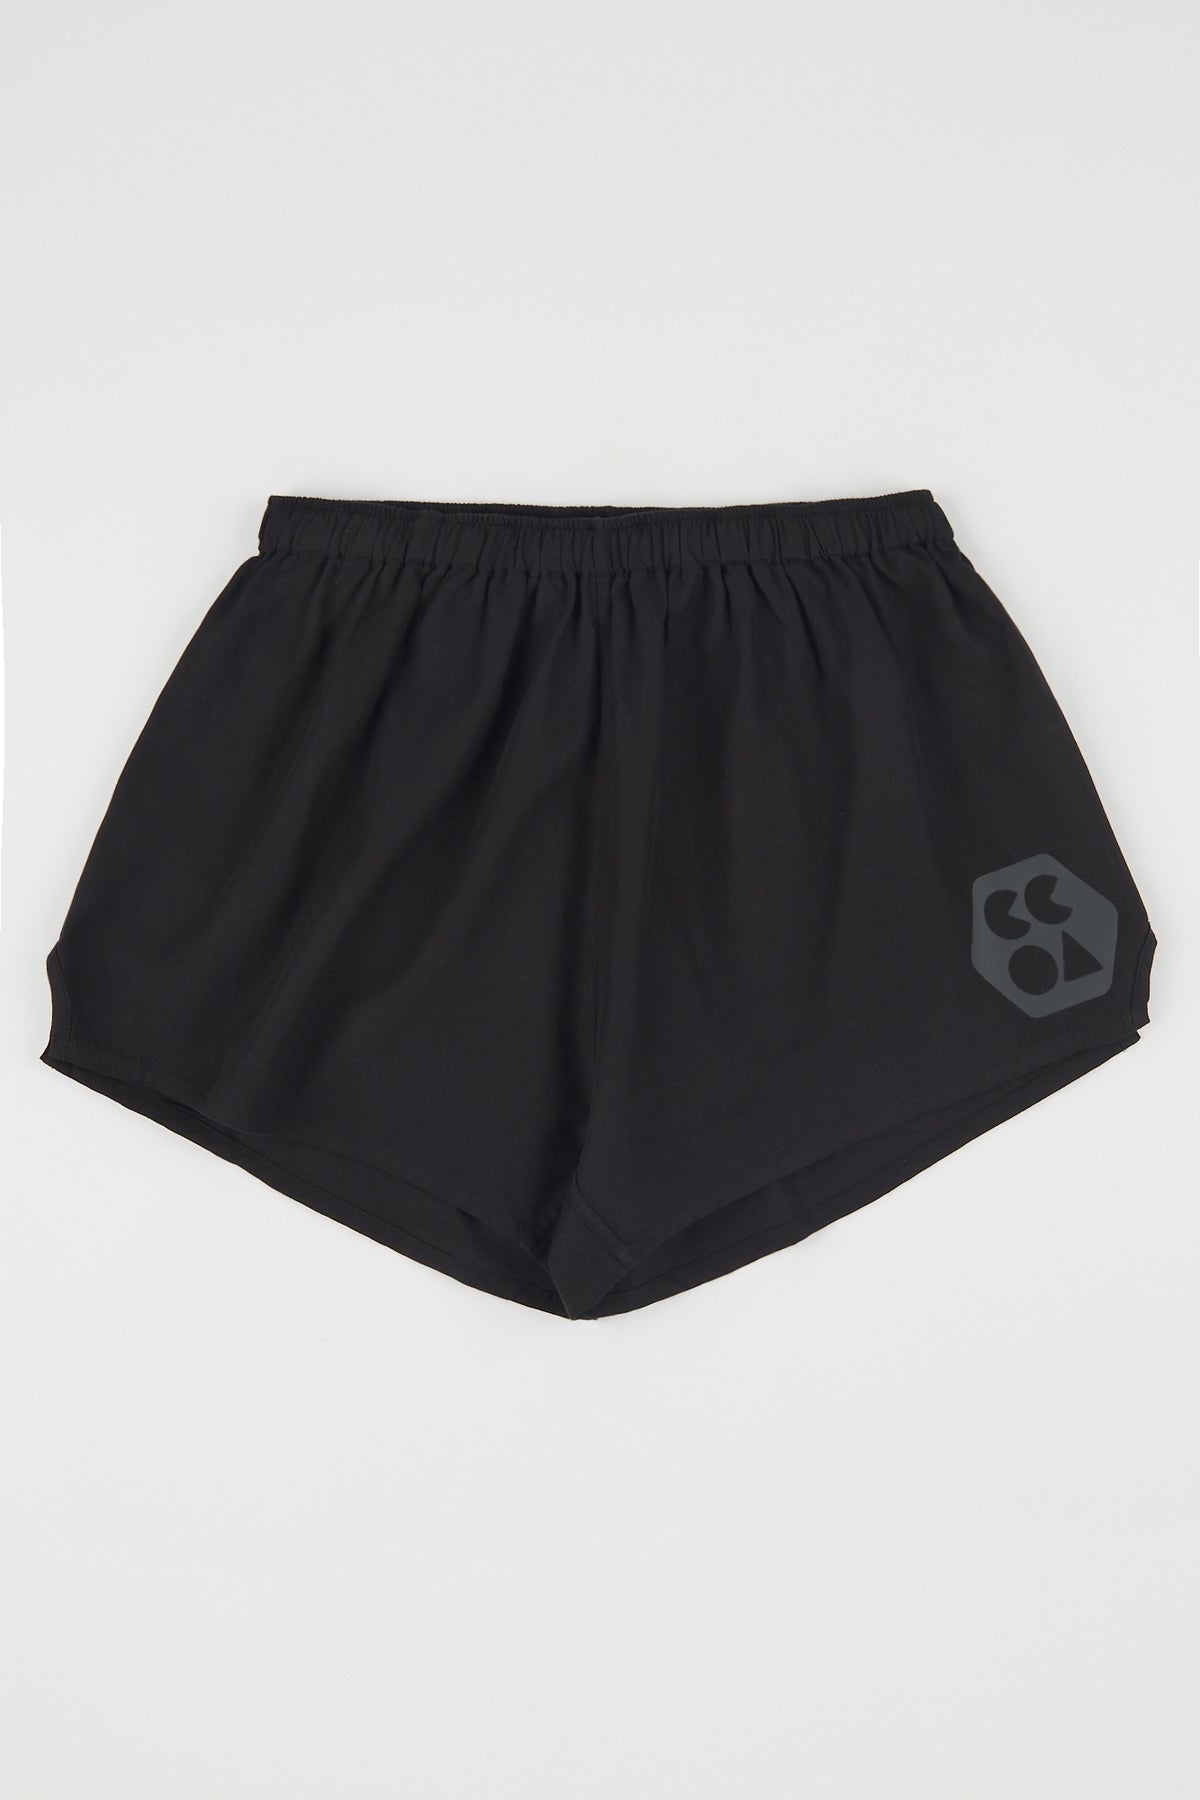 
            Flatlay product shot of women&#39;s lightweight sports short plastic free in black with CCOA logo